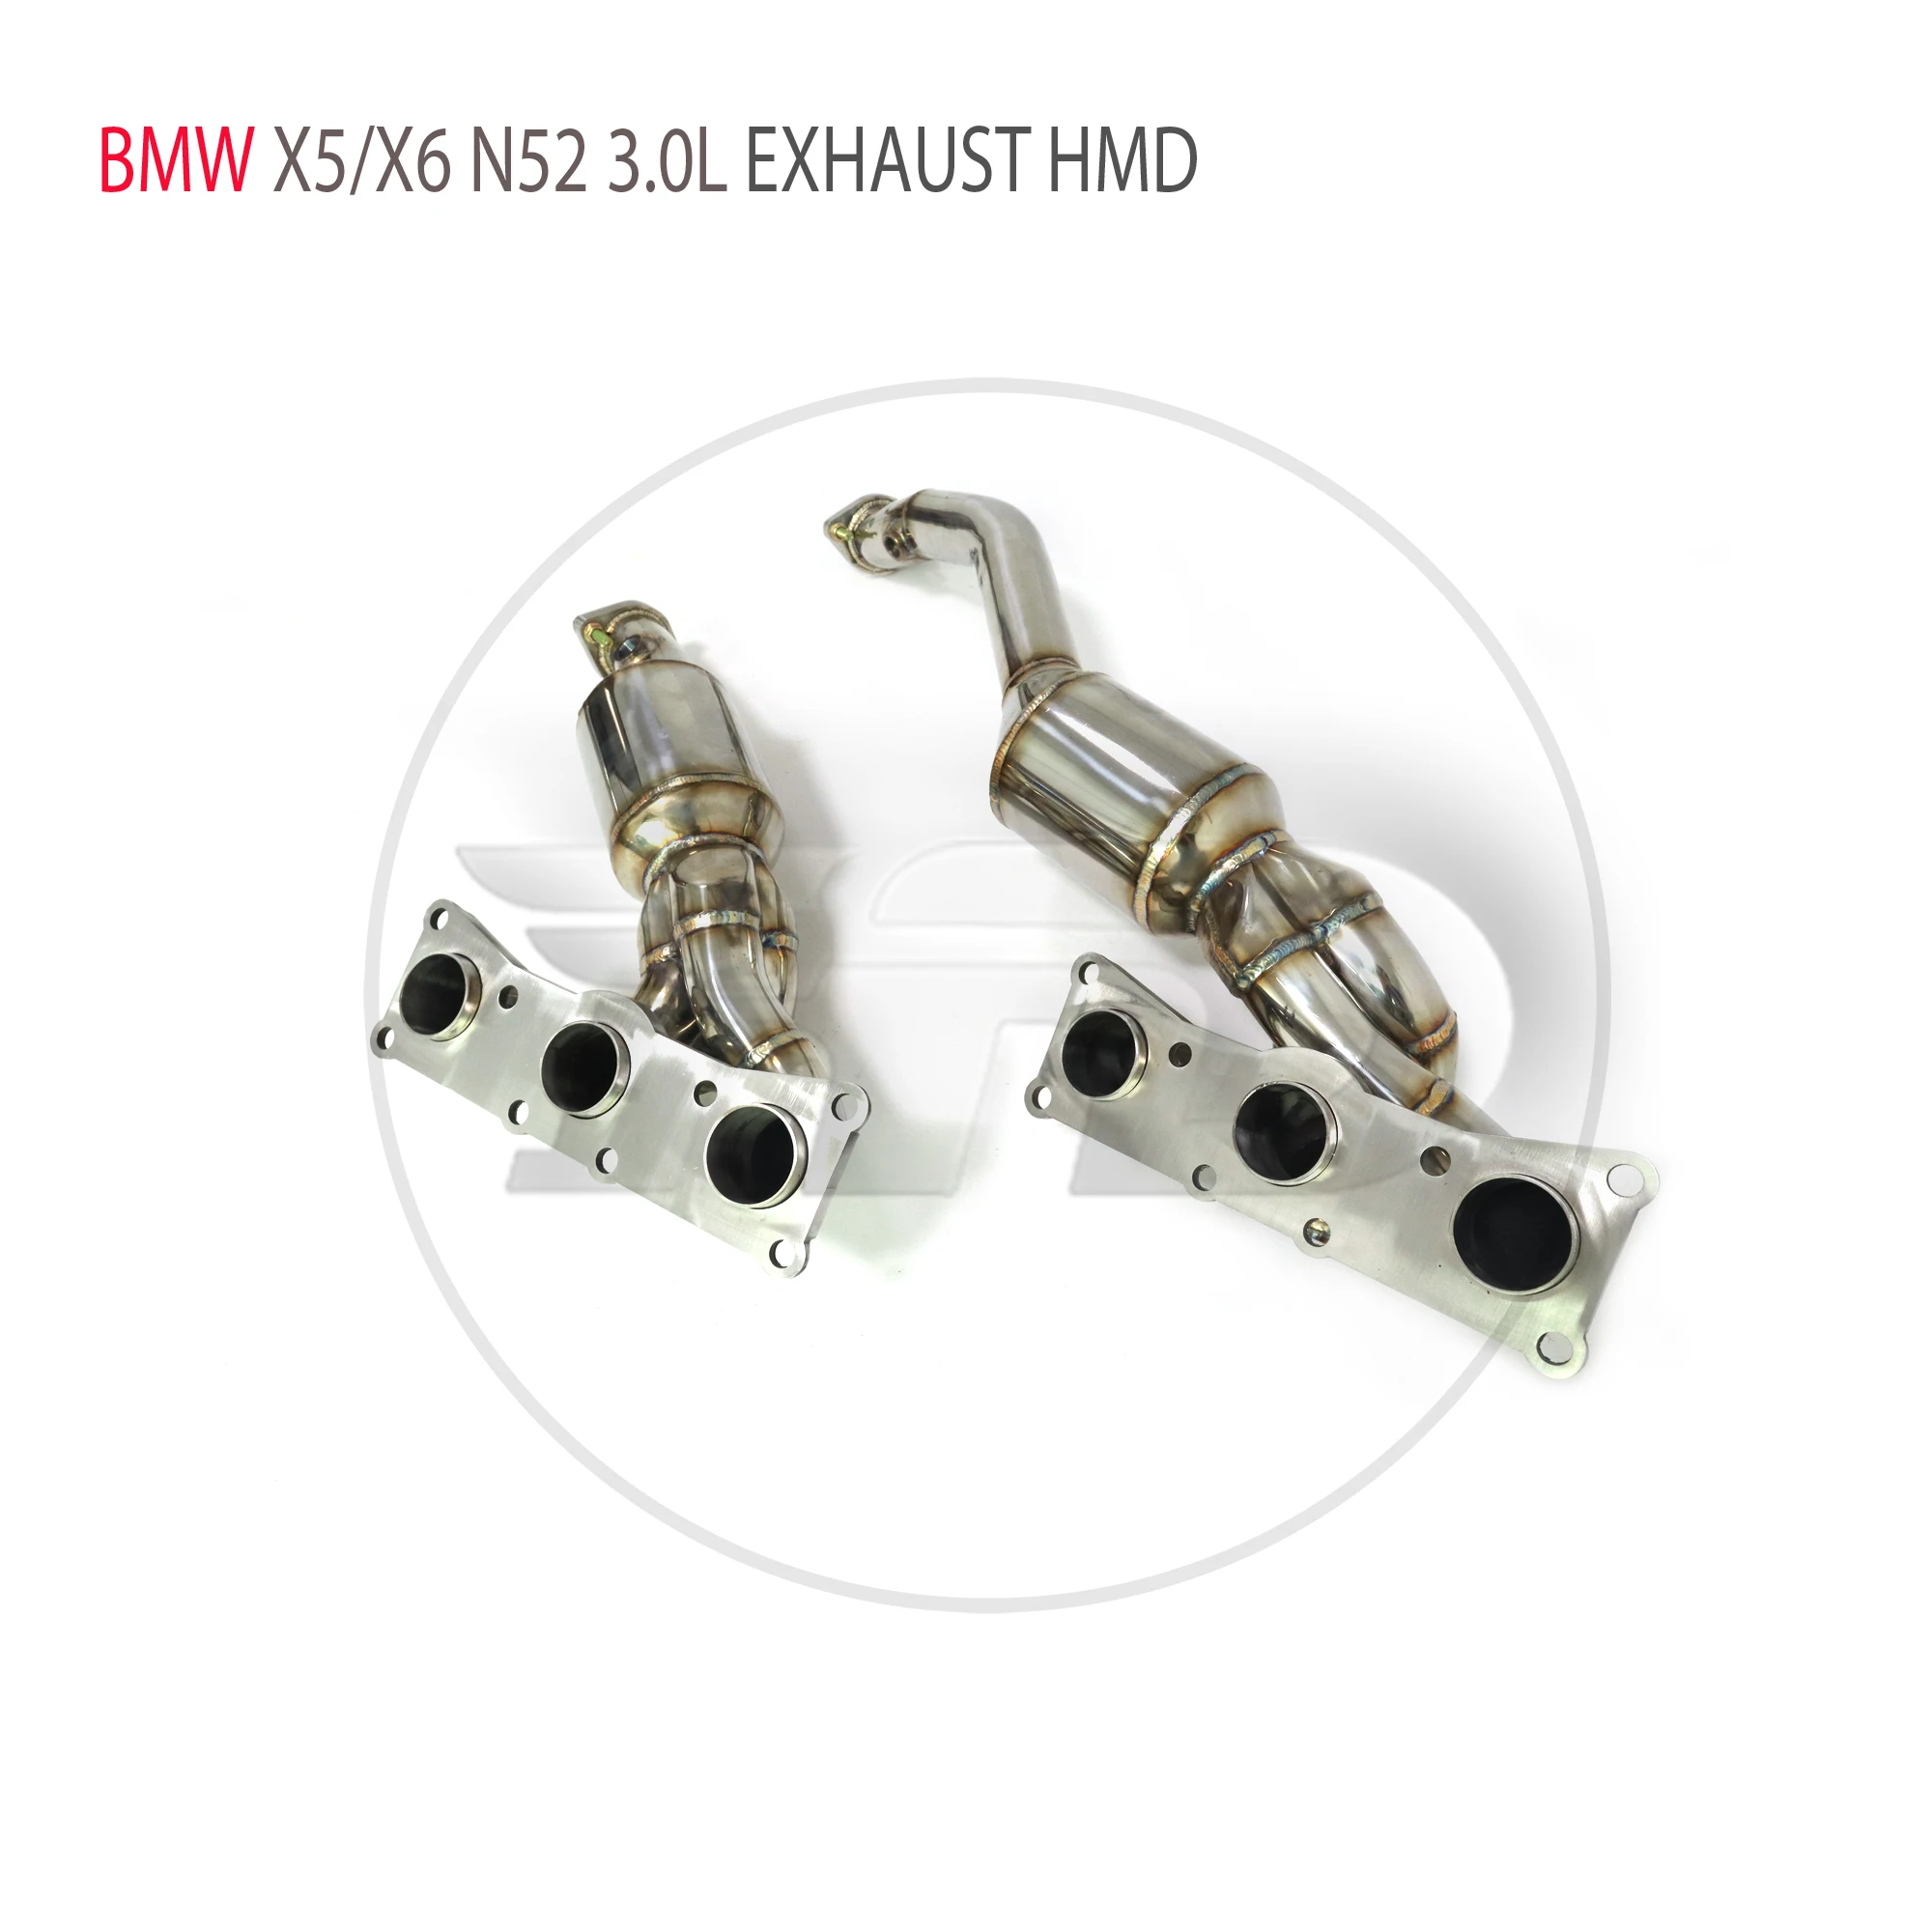 

HMD Exhaust System High Flow Performance Downpipe Manifold for BMW X5 X6 E70 E71 N52 3.0L Catalytic Converter Headers